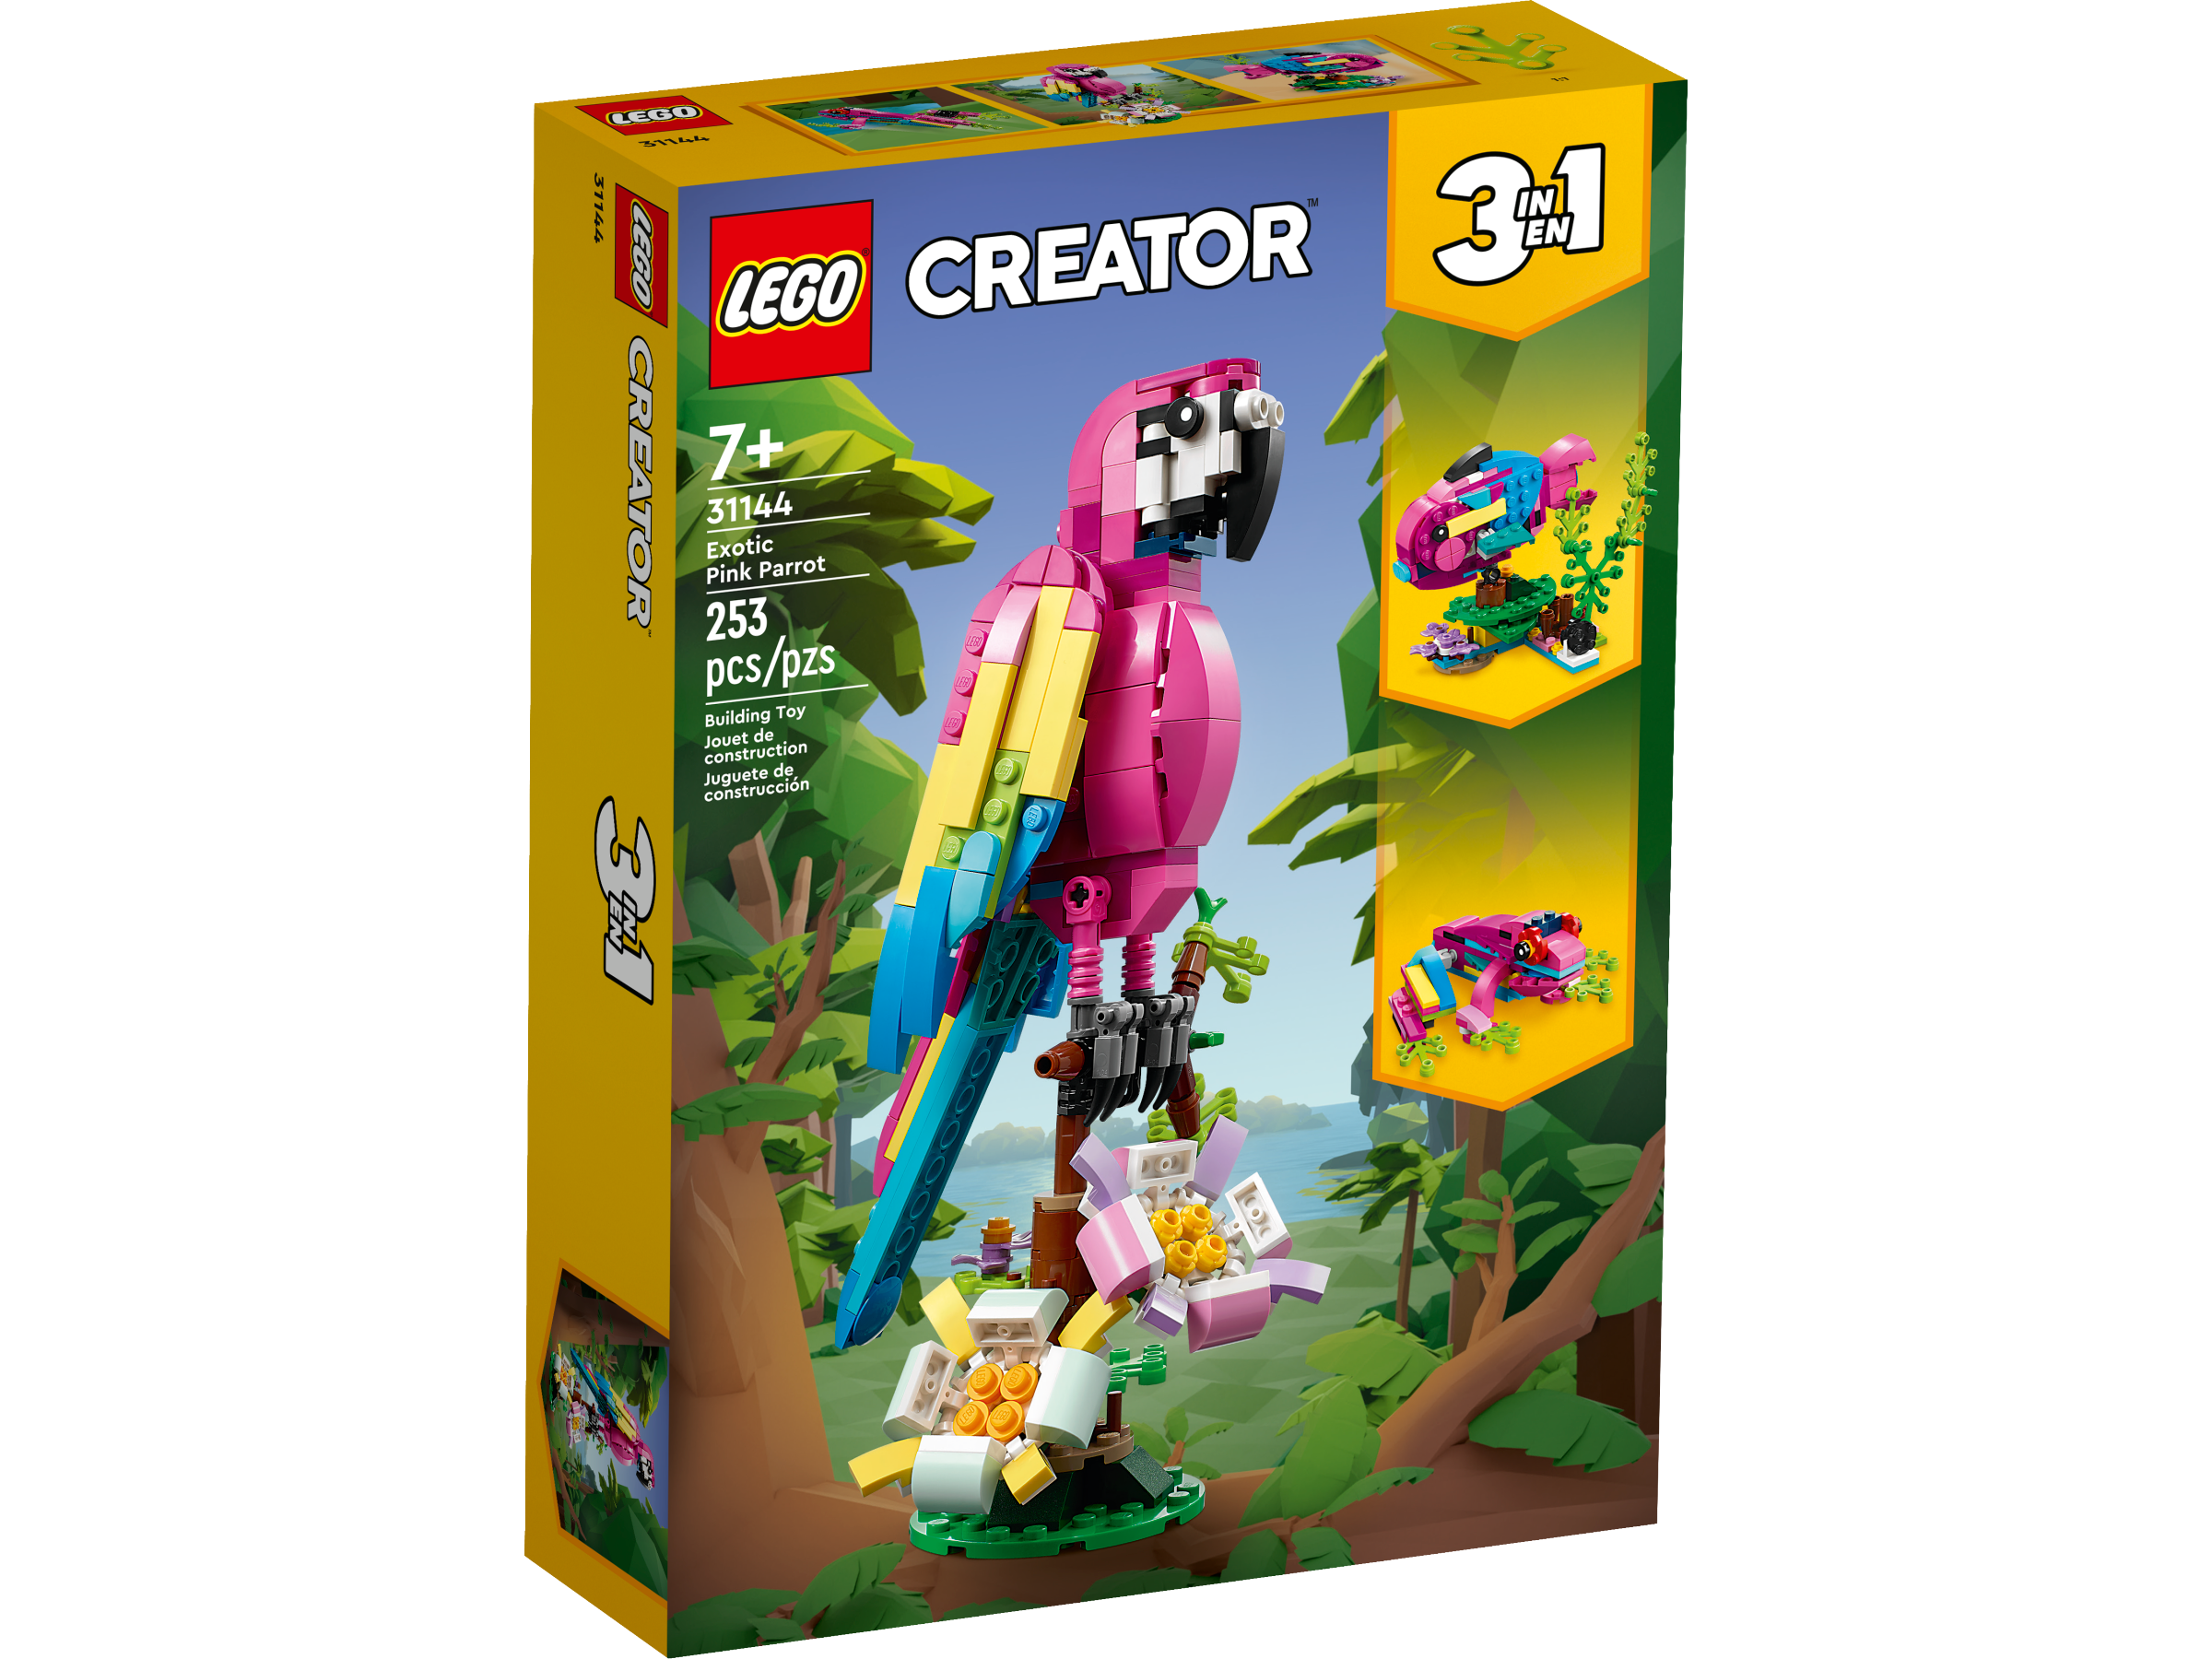 Exotic Pink Parrot 31144, Creator 3-in-1